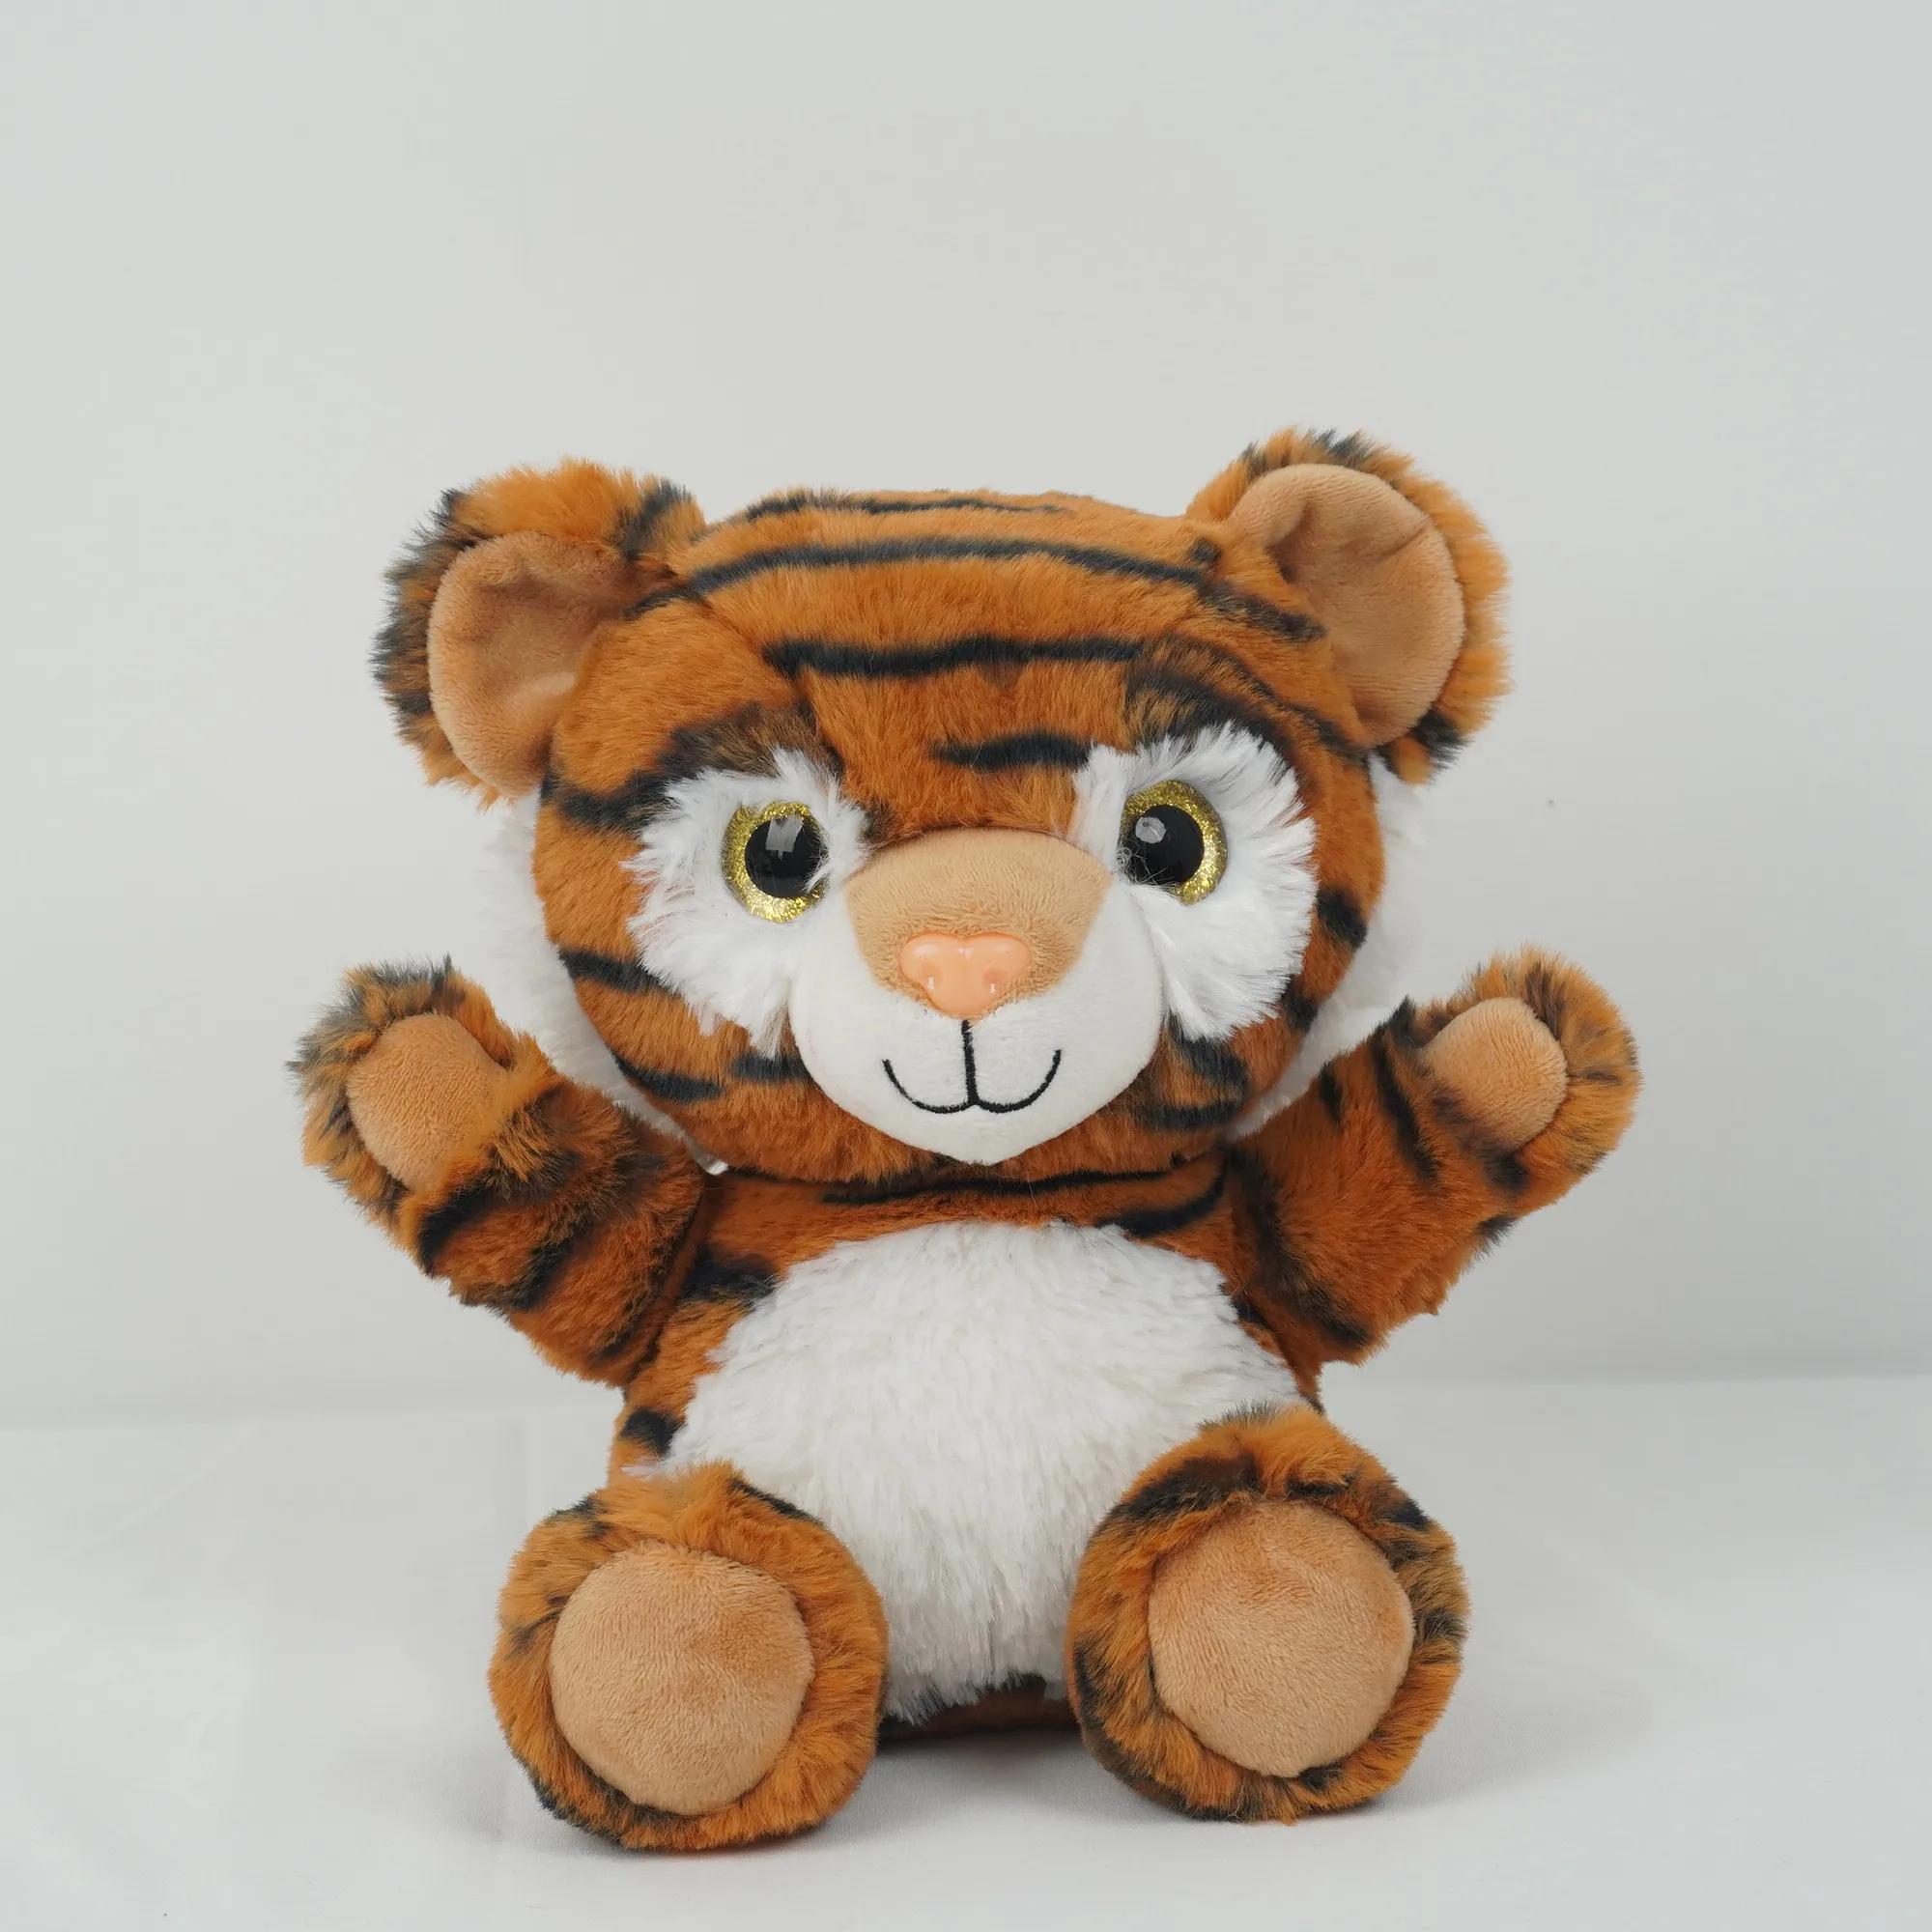 New Arrival Best Price Wholesale Soft Stuffed Animal Toys Tiger Plush Toys  For Children - Buy Animal Stuffed Toys,Animal Tiger Plush Tiger,Plush Toys  Wholesale Product on 